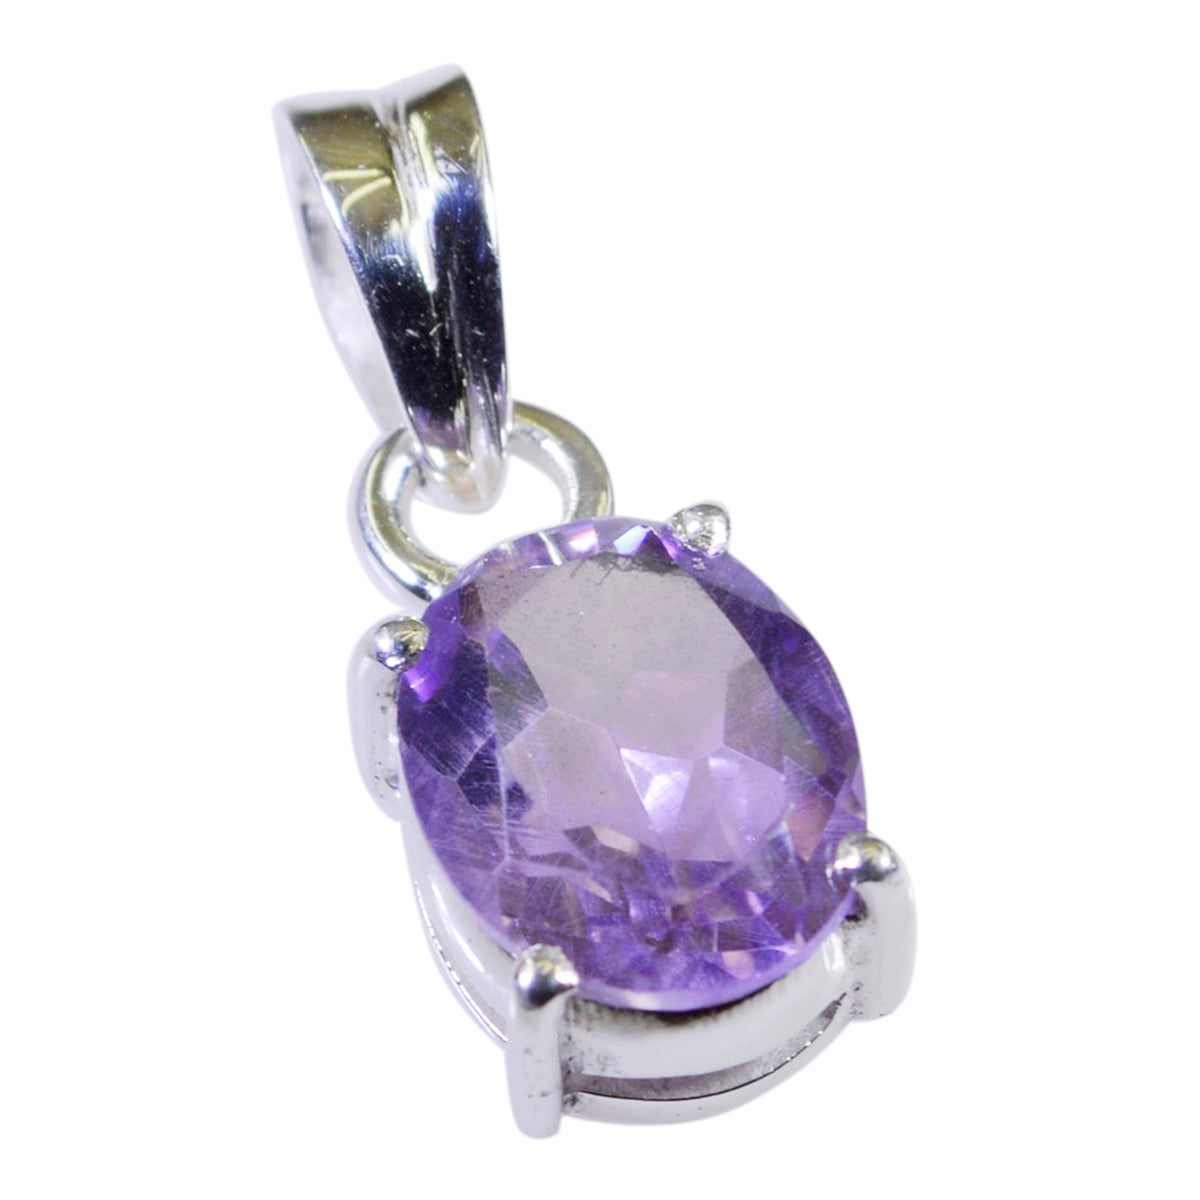 Riyo Nice Gemstone Oval Faceted Purple Amethyst 925 Sterling Silver Pendant gift for Faishonable day